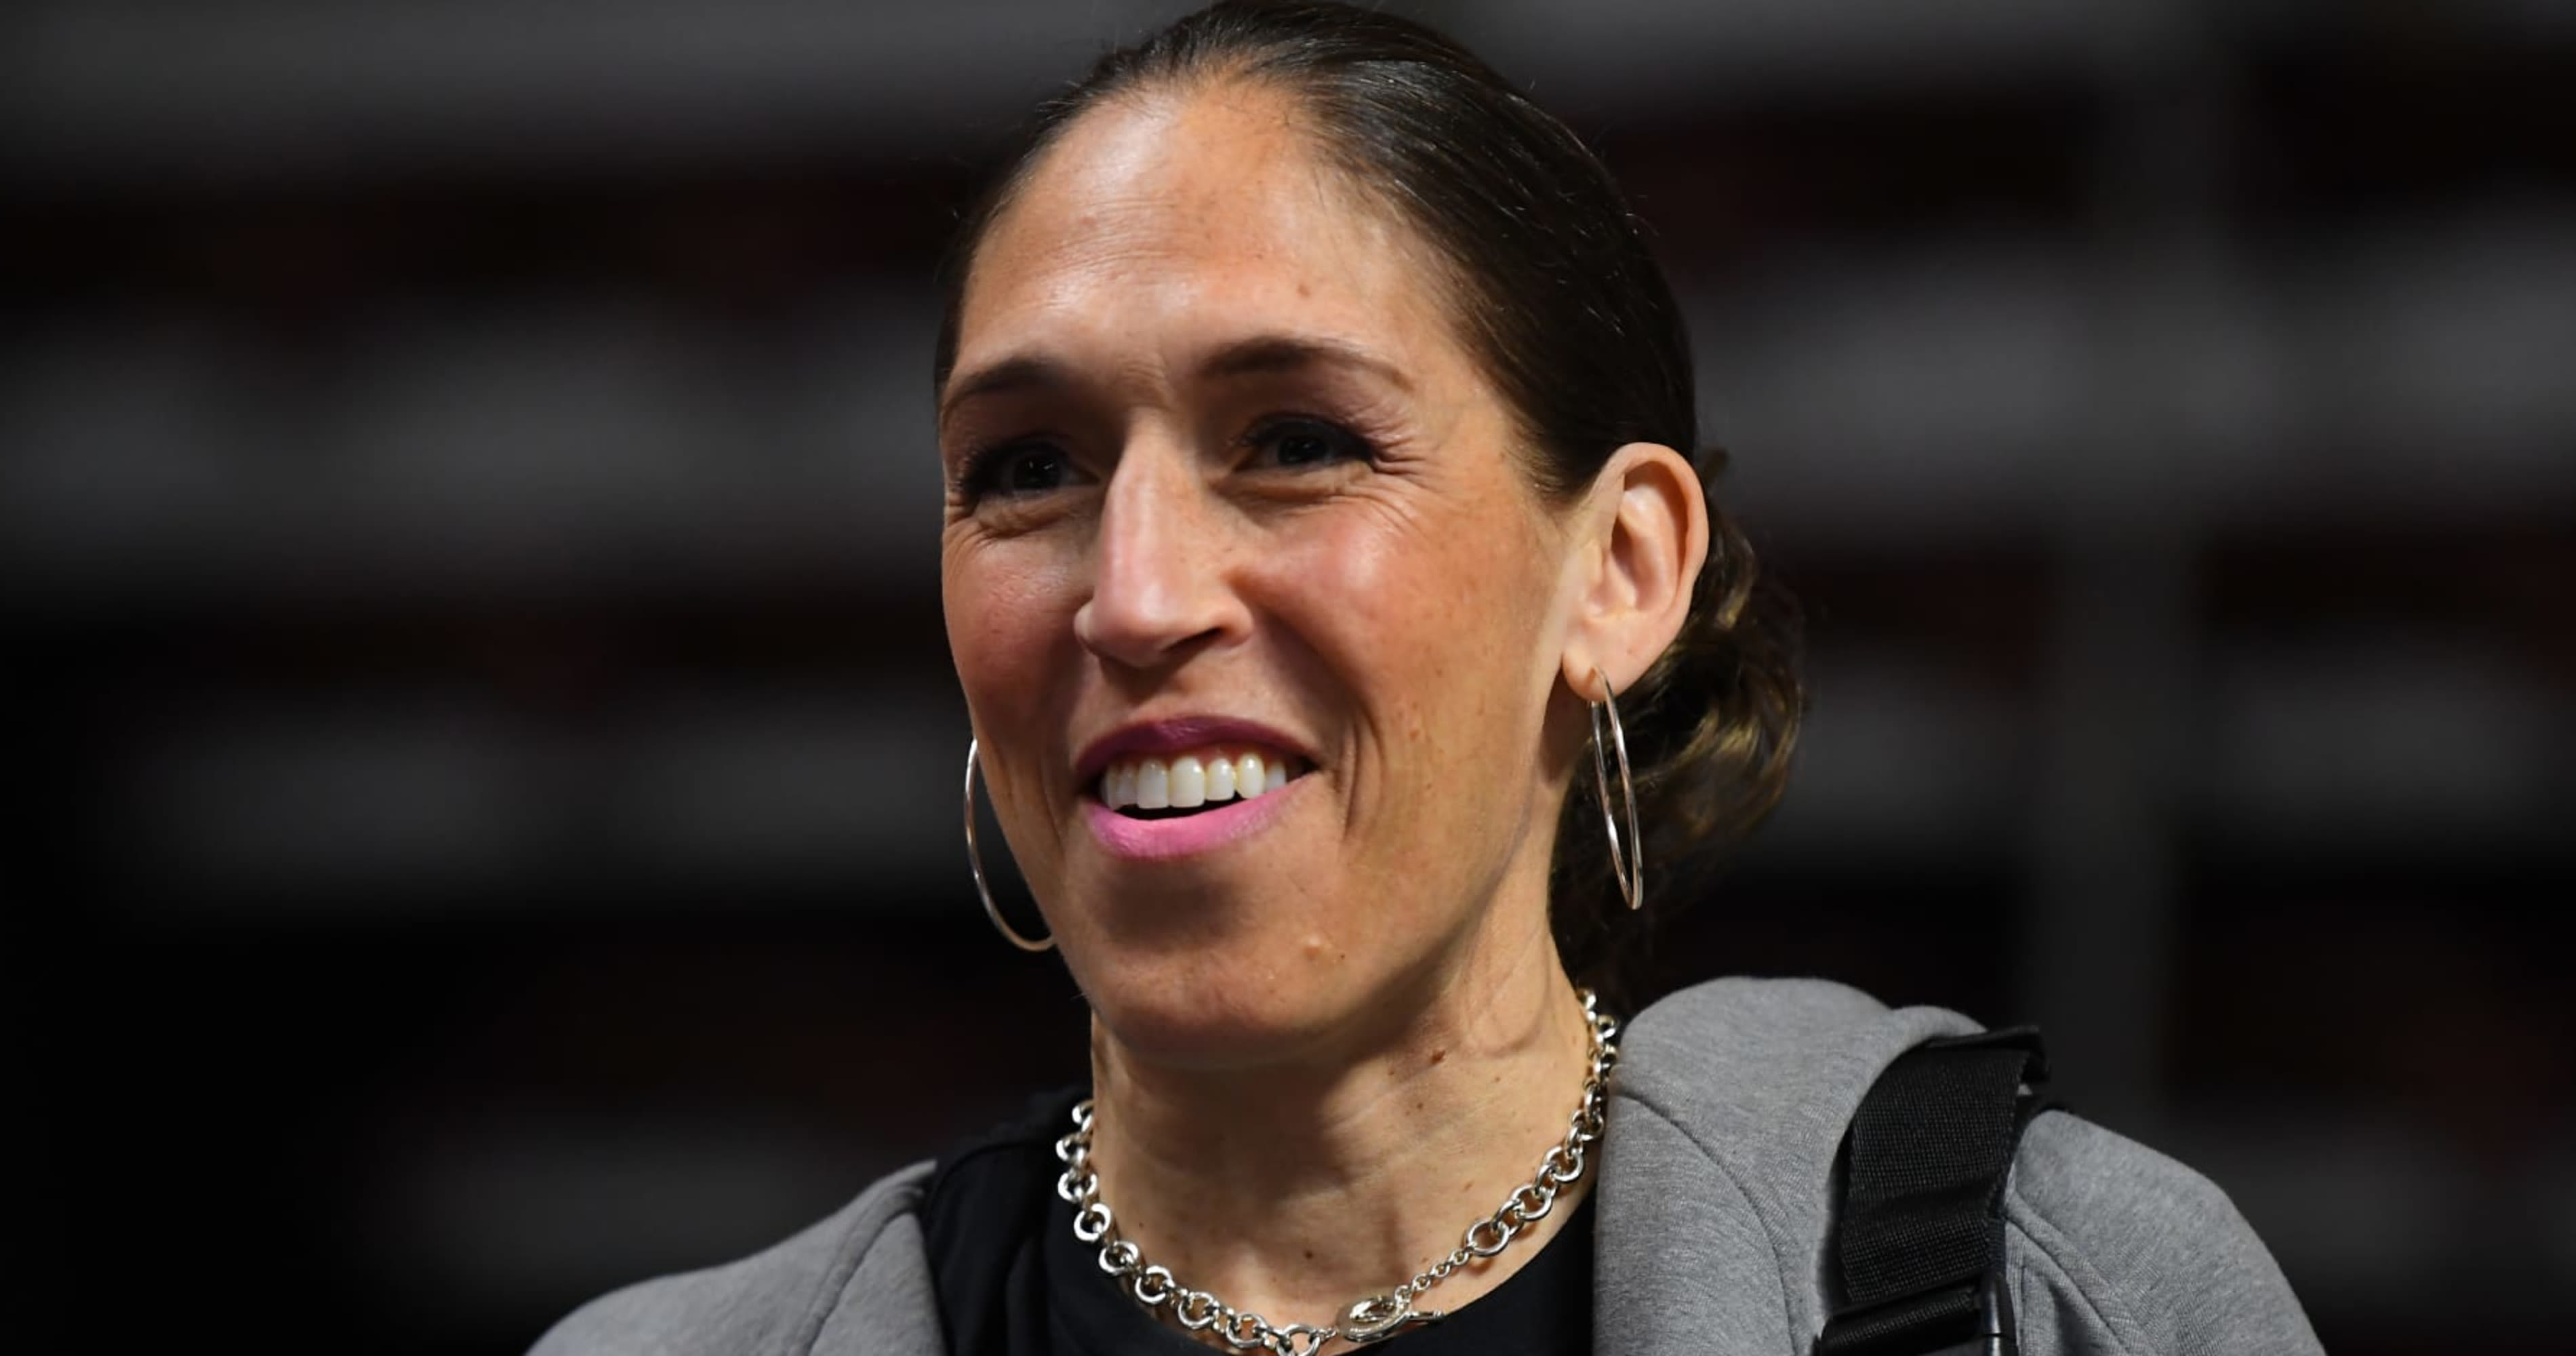 Video: WNBA Legend Rebecca Lobo Details Sexist Comment from Ref While Coaching Son